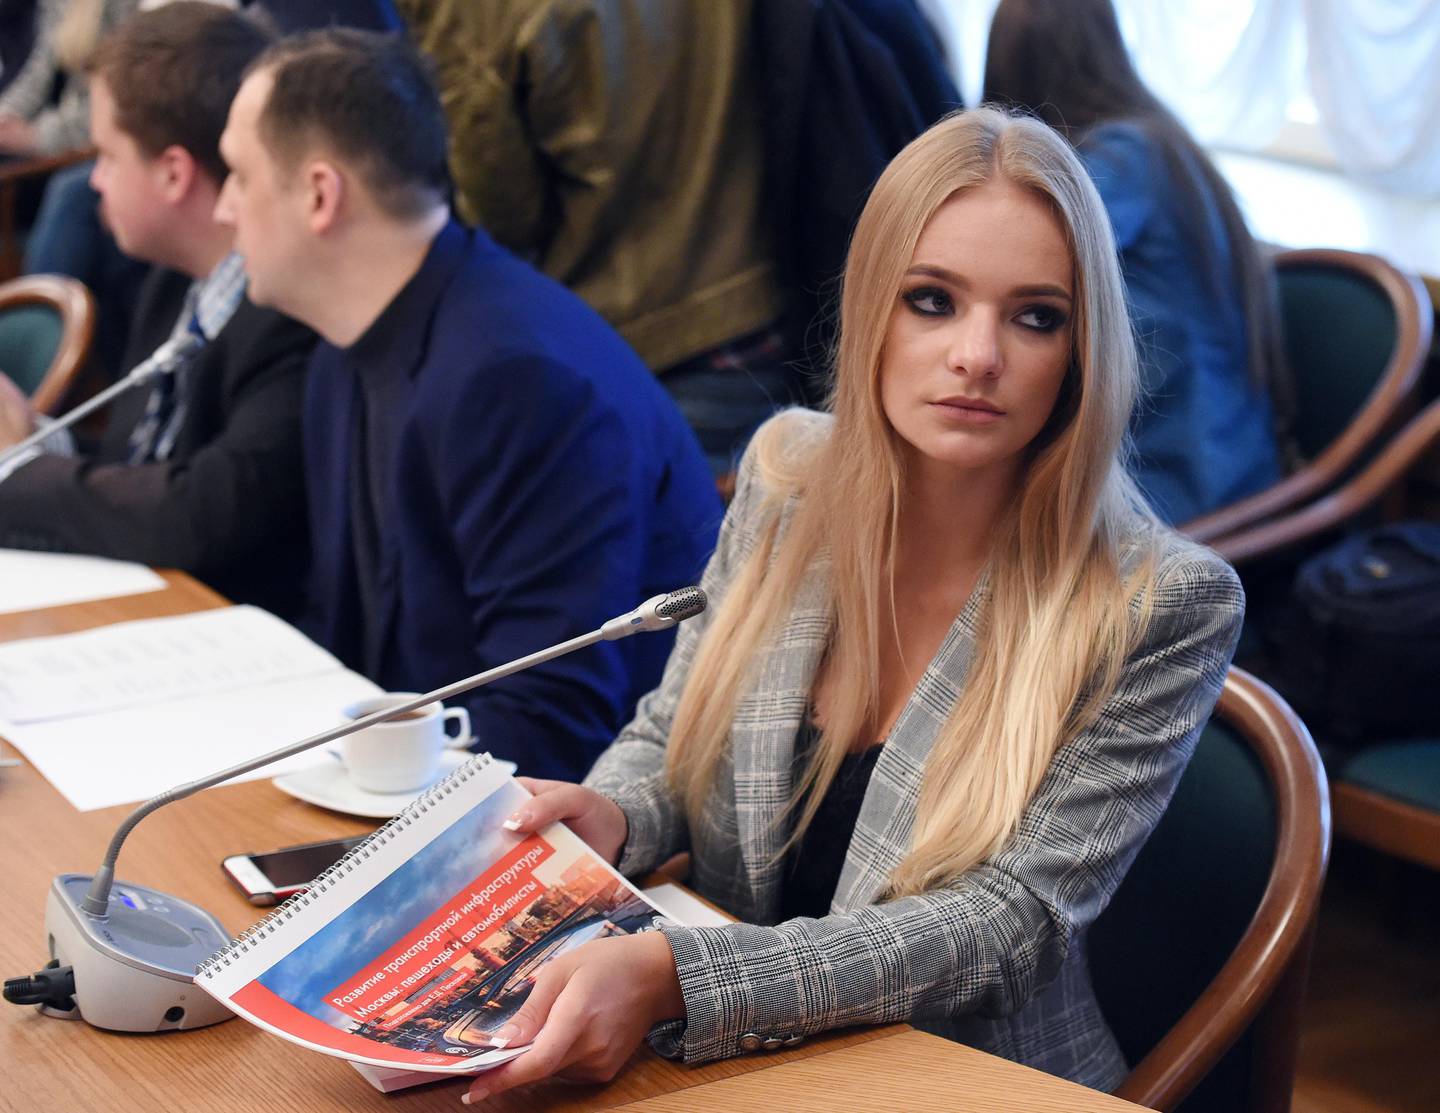 In this photo taken on Monday, June 19, 2017, Elizaveta Peskova attends a Council meeting of bloggers at the Russian State Duma, the Lower House of the Russian Parliament in Moscow, Russia. The daughter of the spokesman for Russian President Vladimir Putin has secured an intern's job at the European Union's legislature at a time of increasing political confrontation between the EU and Russia. Right-wing French lawmaker Aymeric Chauprade on Tuesday, Feb. 26, 2019 defended his decision to hire Elizaveta Peskova, the daughter of Dmitry Peskov, saying she is a trainee studying law and international relations in France (Dmitry Dukhanin/Kommersant Photo via AP) RUSSIA OUT